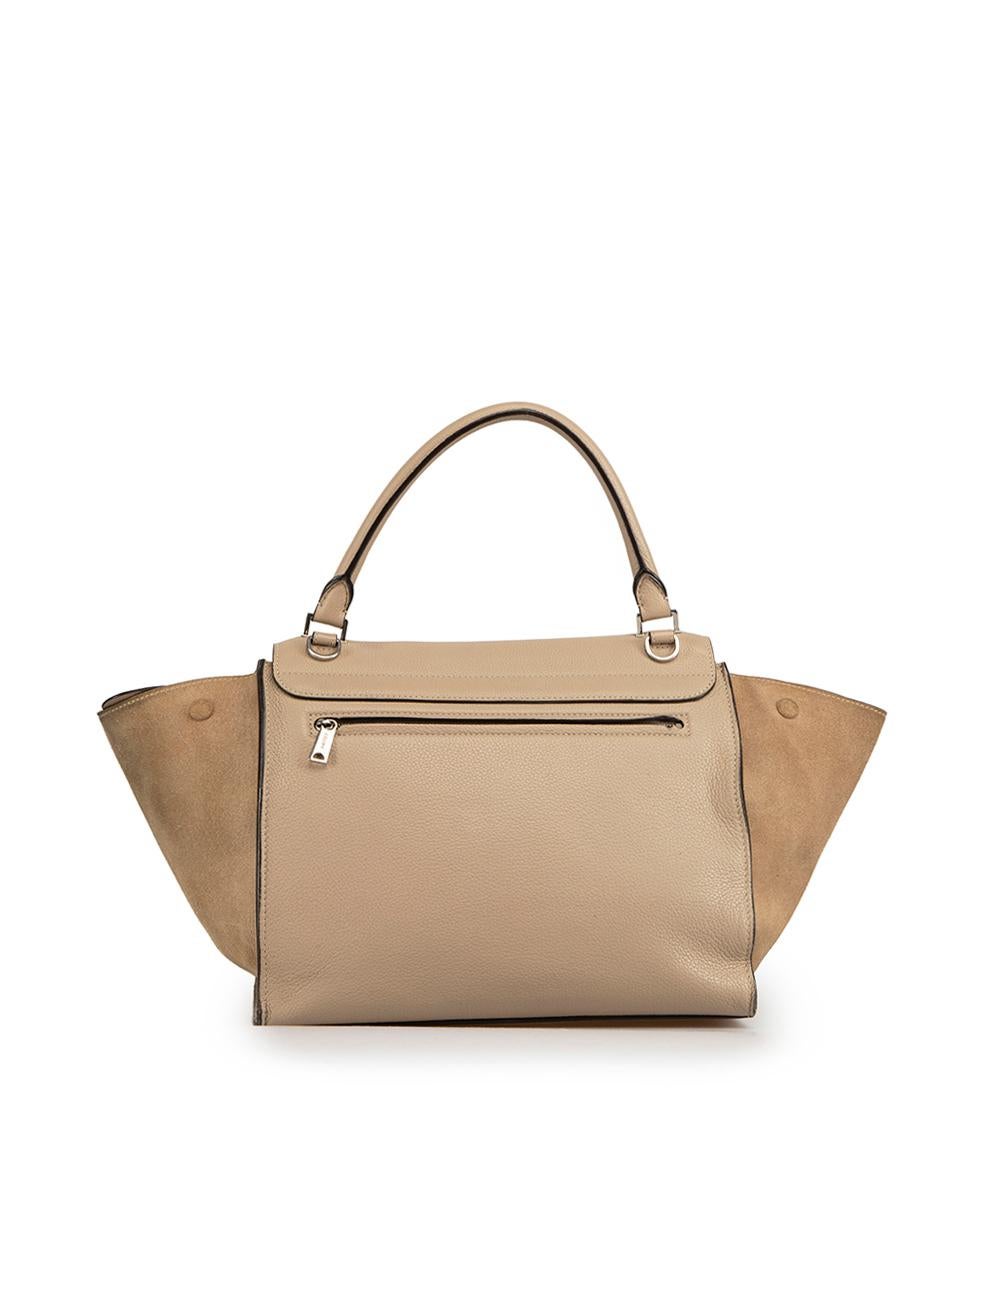 Celine Beige Leather Large Trapeze Top Handle Bag In Excellent Condition For Sale In London, GB